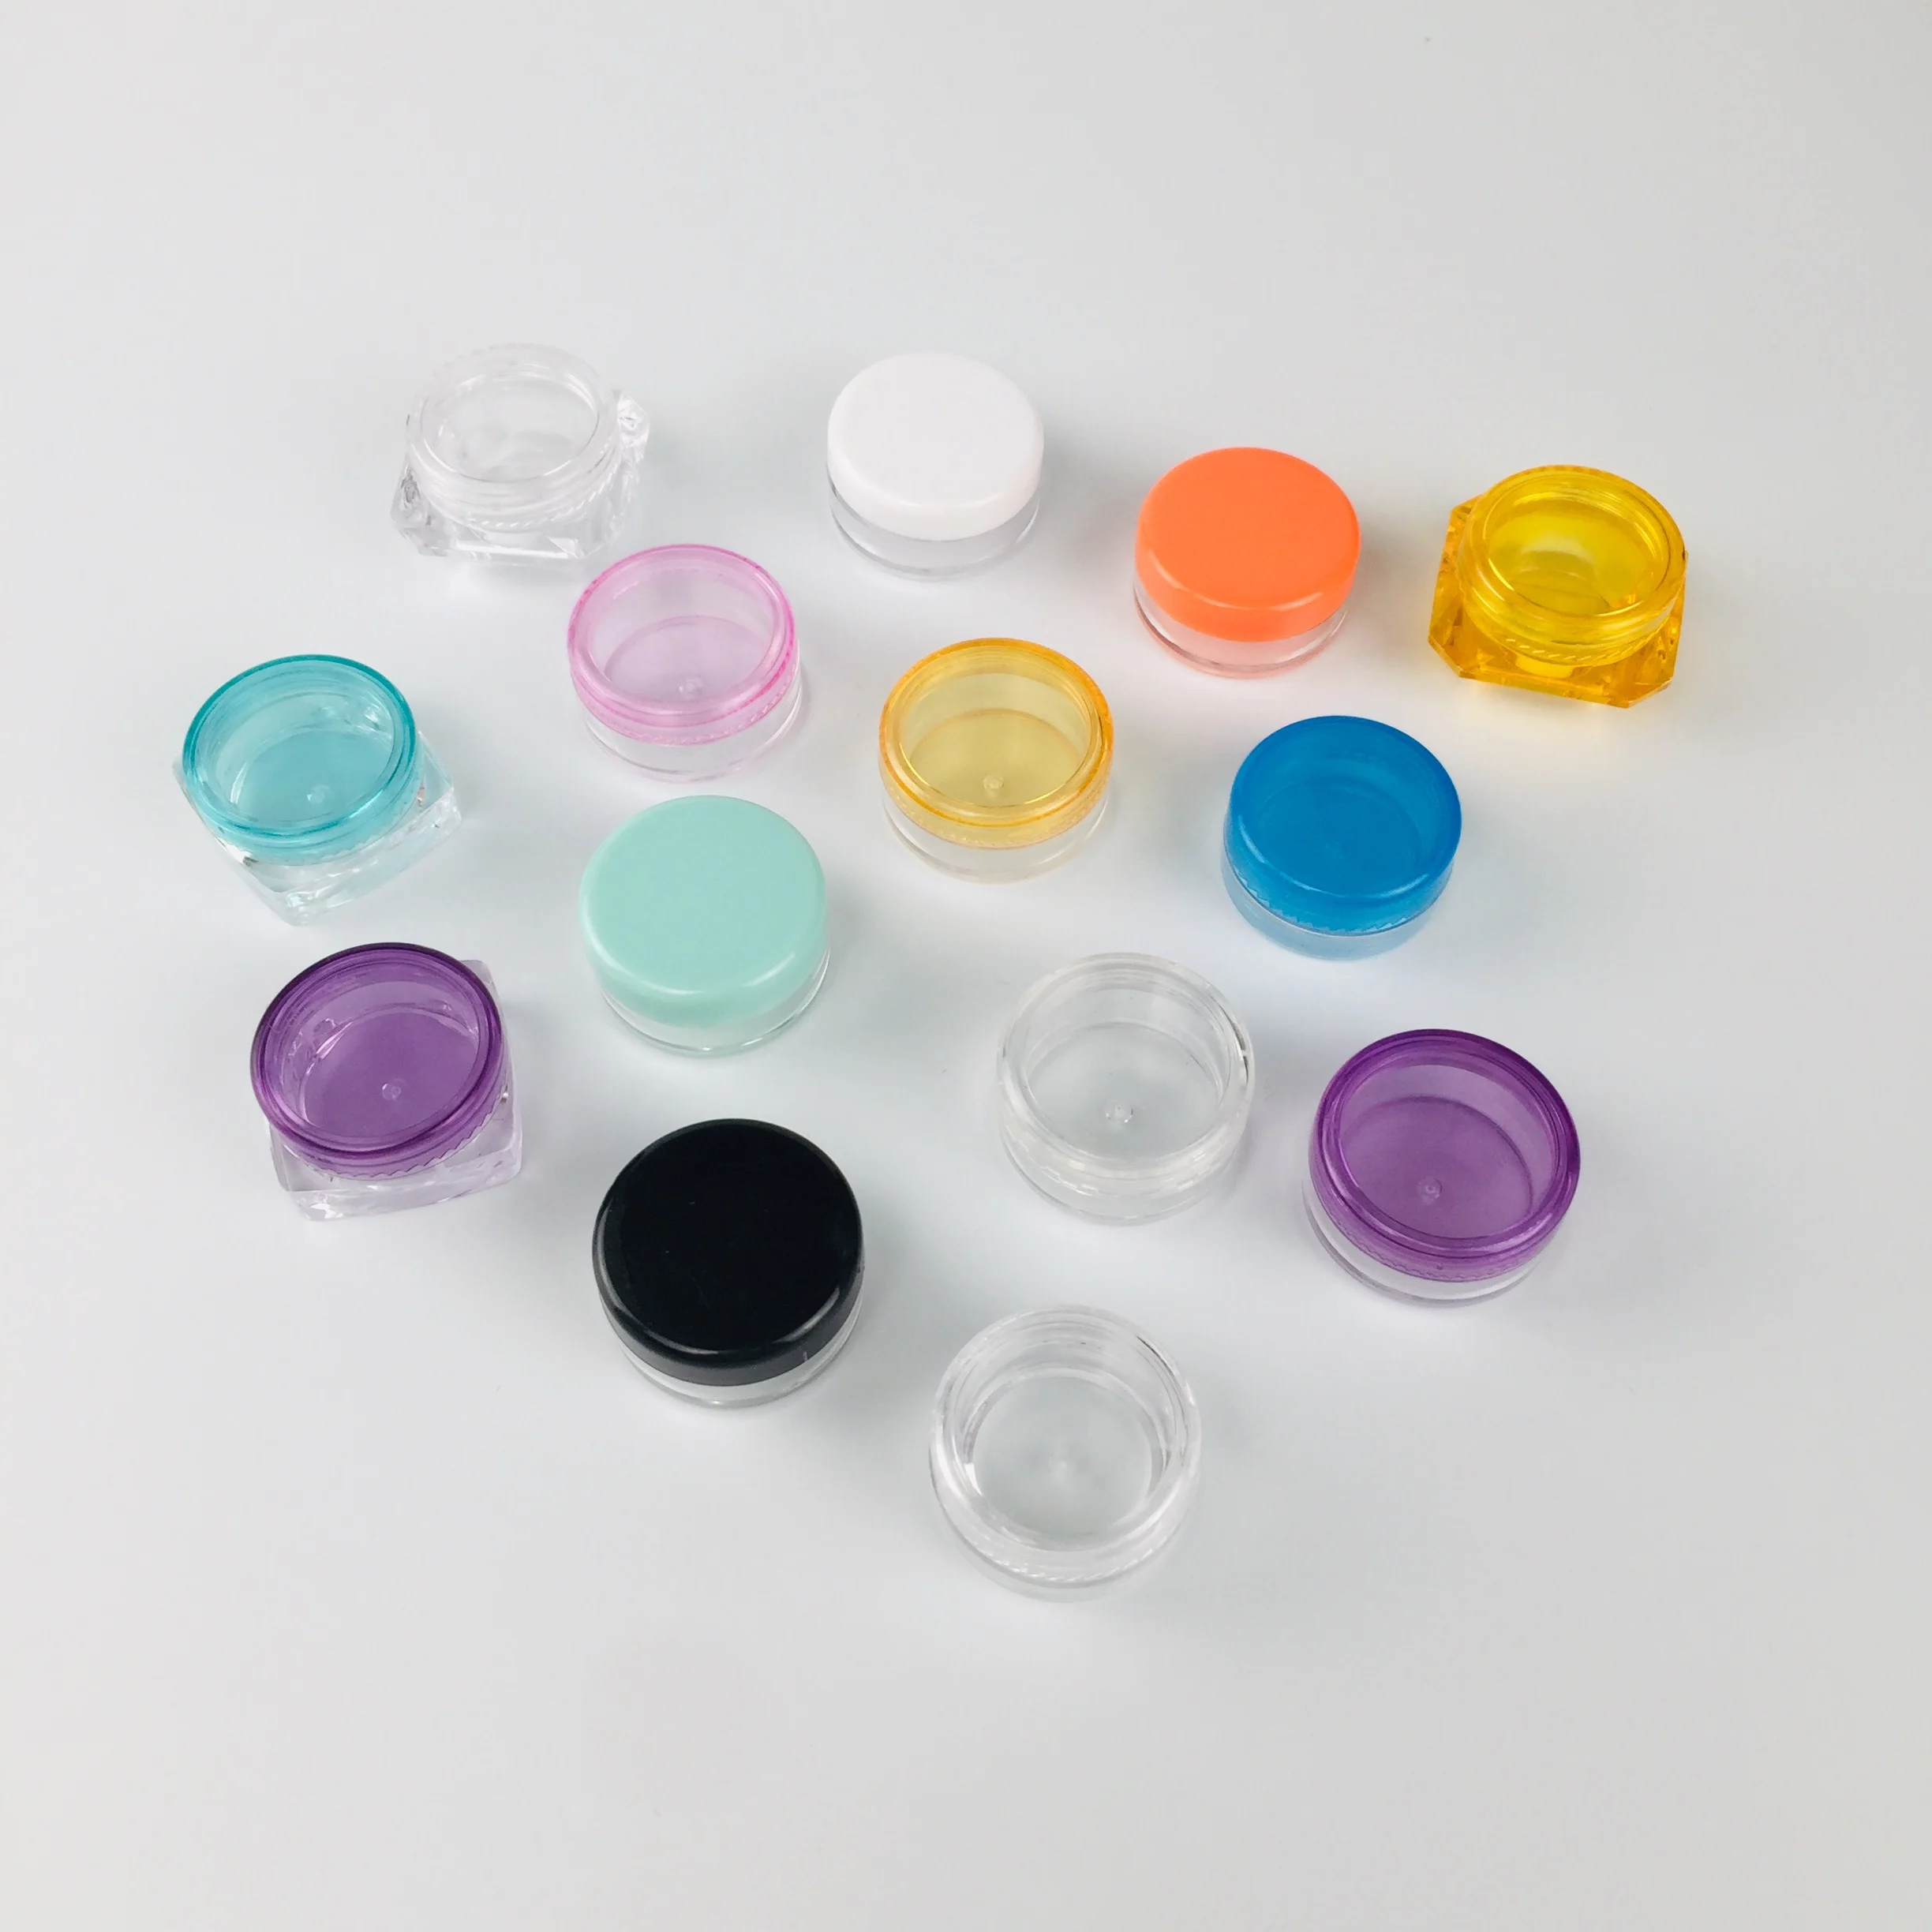 60pcs 3 Gram / 3ML Empty Sample Containers with Lids, Plastic Small Pot Jars  Clear Tiny Makeup Cosmetic Containers for Creams, Eye Shadow, Powder,  Jewelry